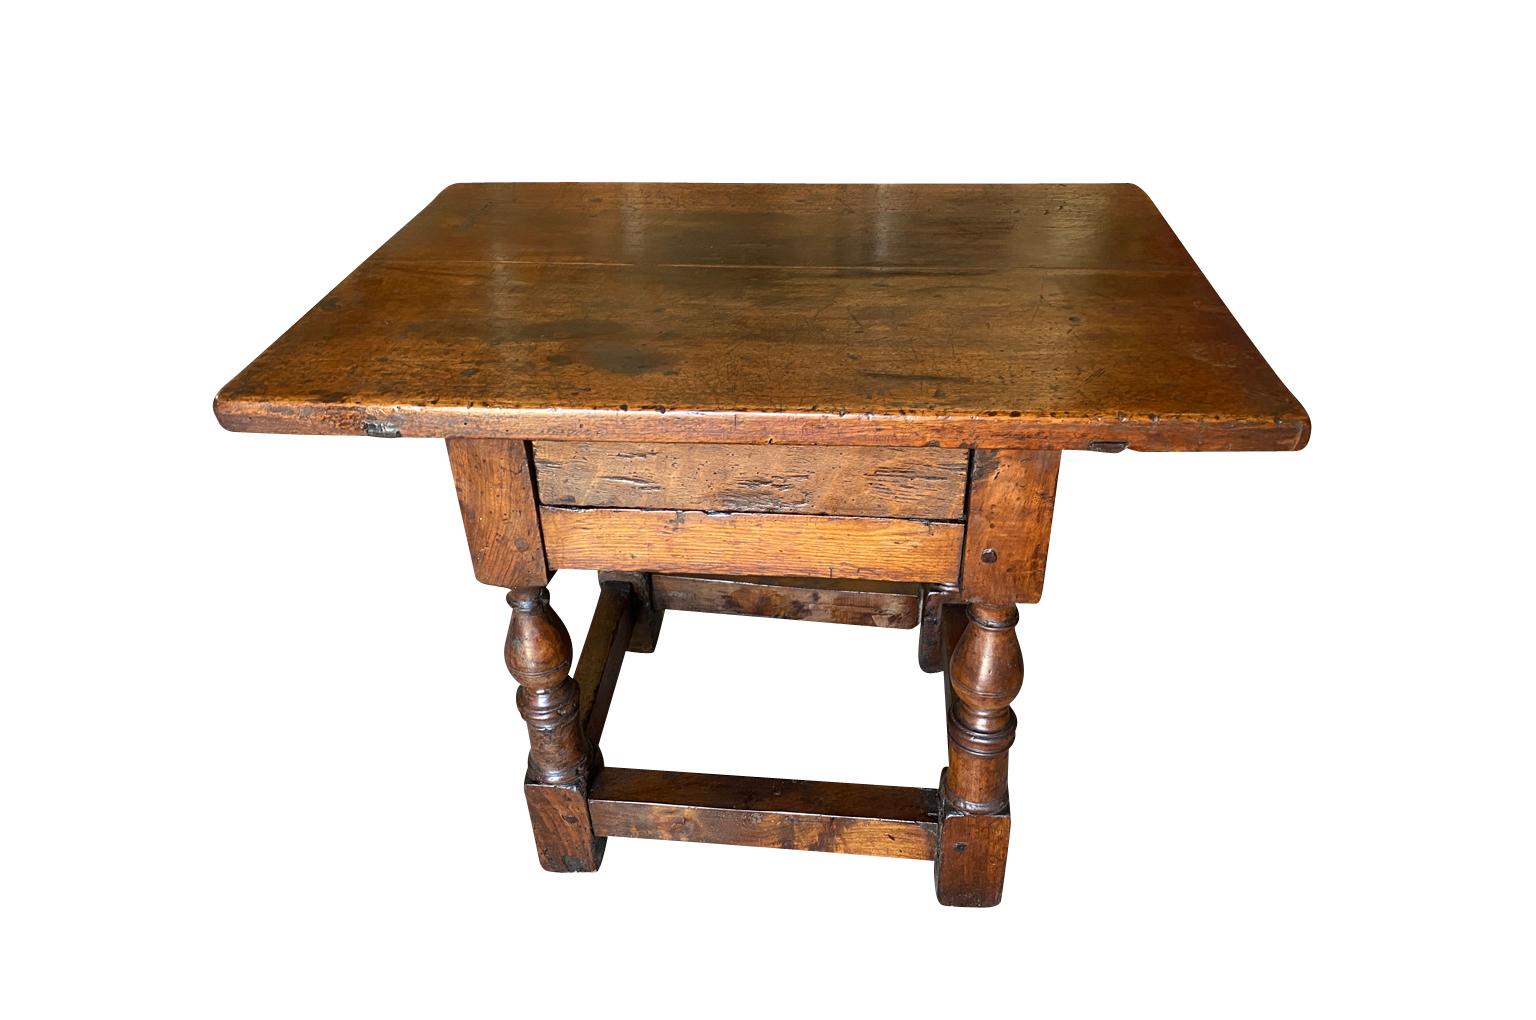 A very charming 18th century Side Table from Northern Italy. Beautifully constructed from handsome walnut with a single drawer. Terrific patina.